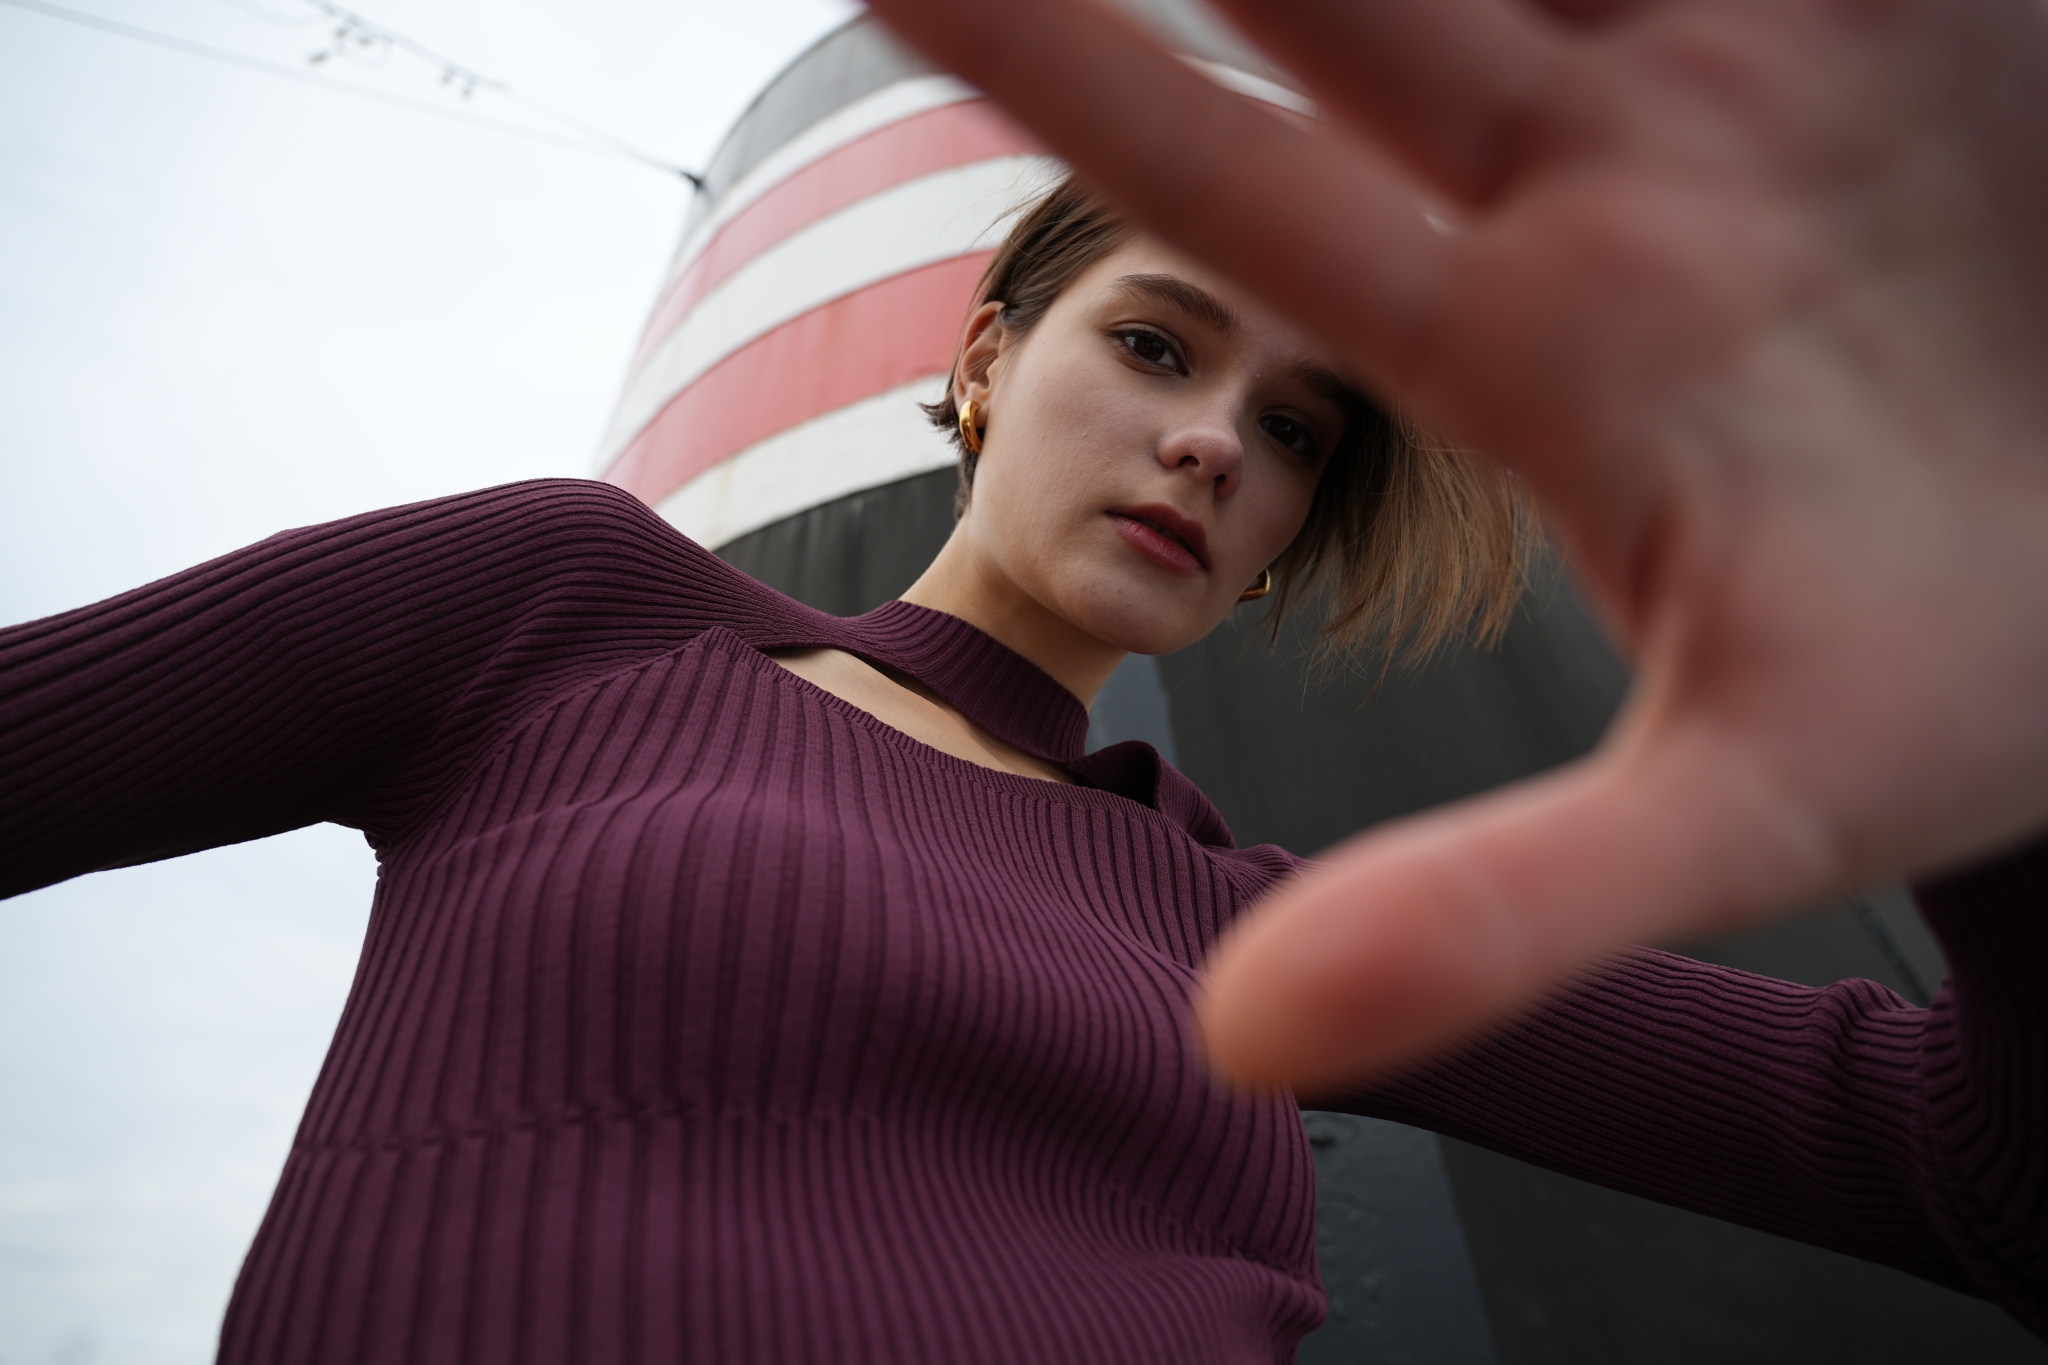 Upward shot of a female model, looking to camera and covering part of the shot with her hand